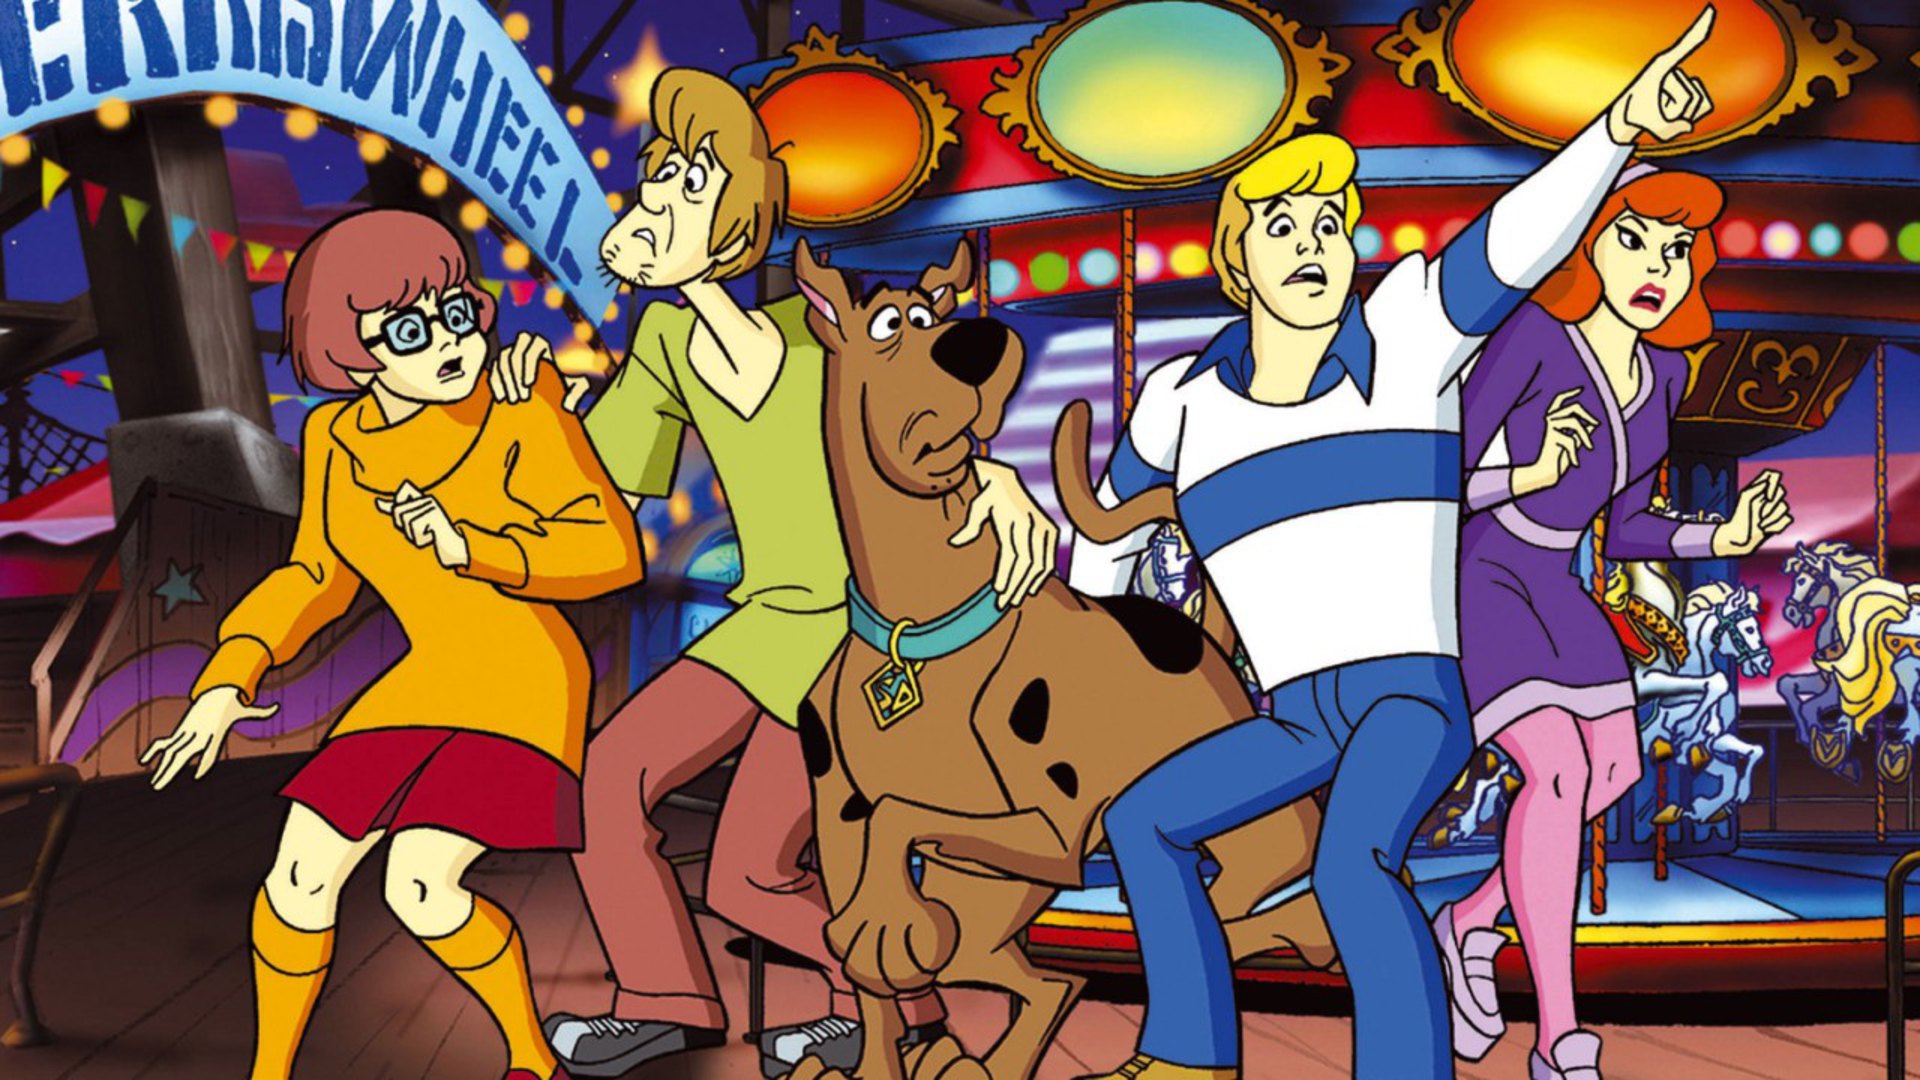 Scooby Doo Tv Series : A Pup Named Scooby-doo Took Scooby And The Gang ...